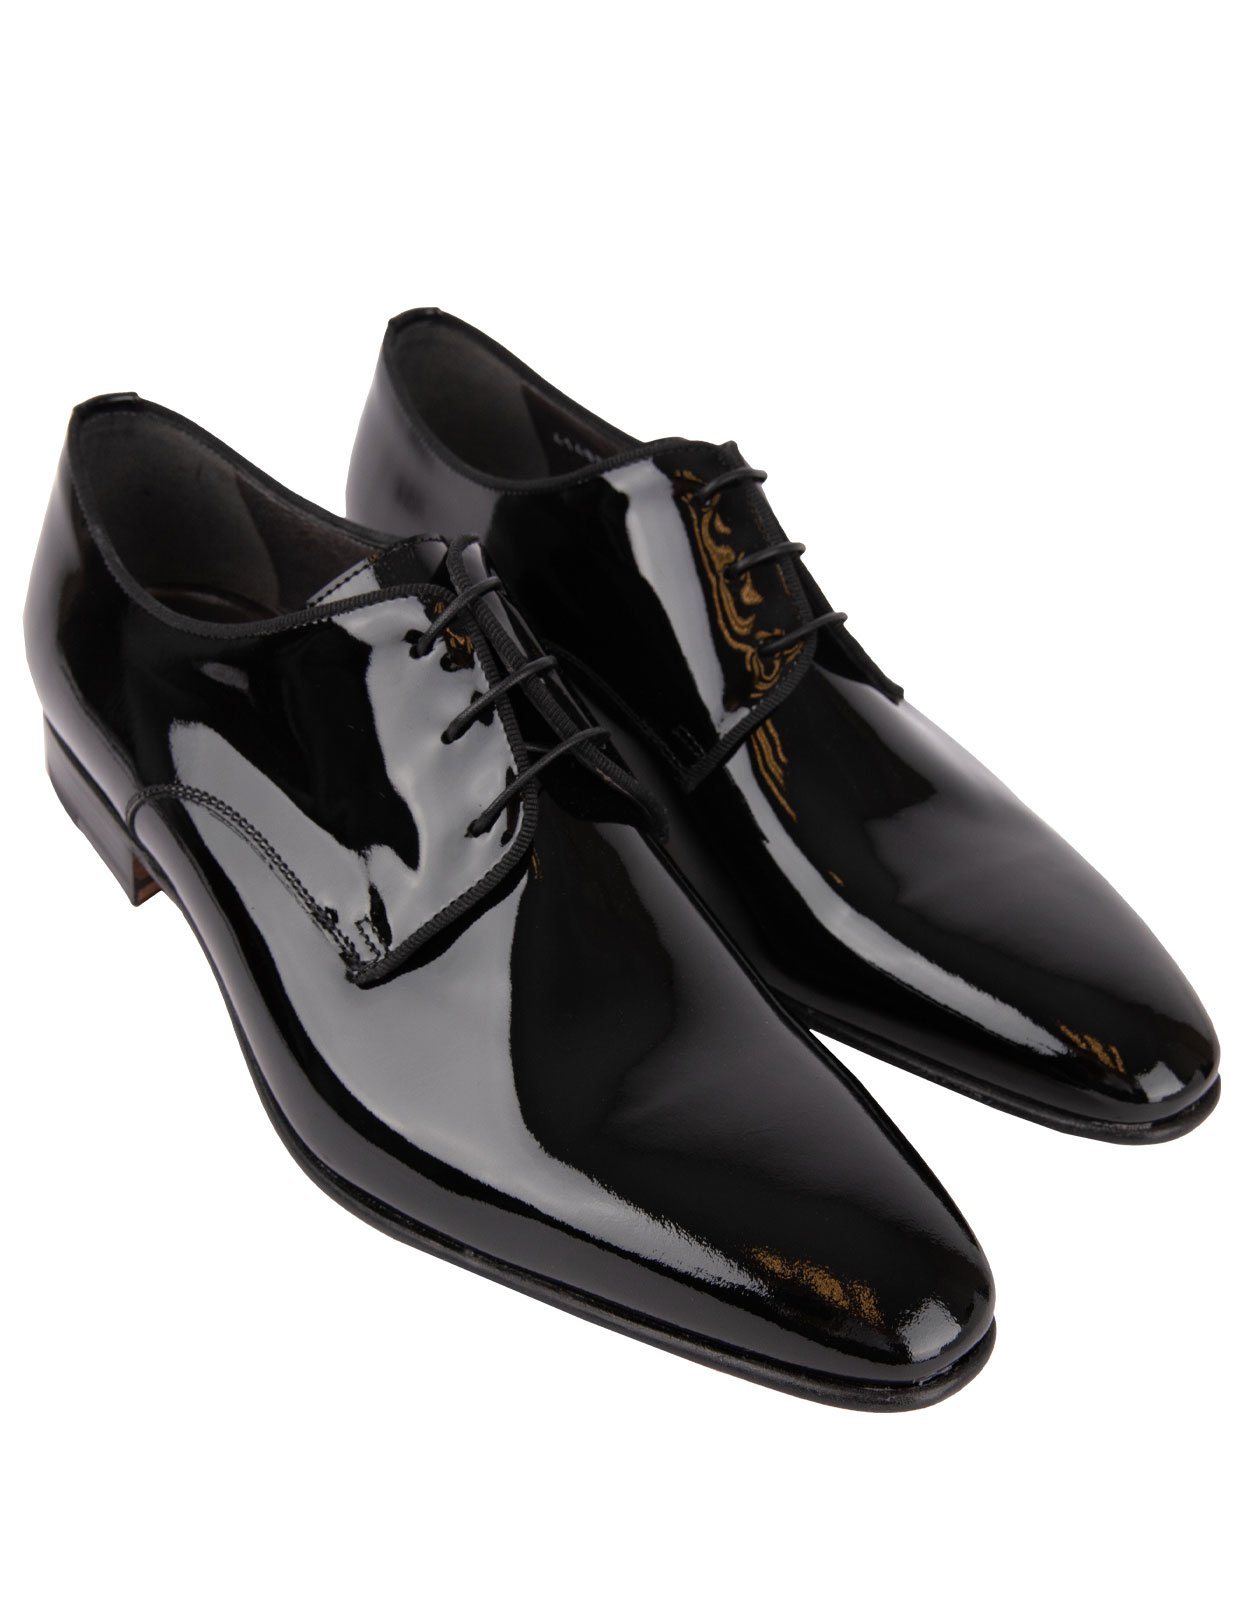 Lille Patent Leather Derby Shoes Black Stl 6